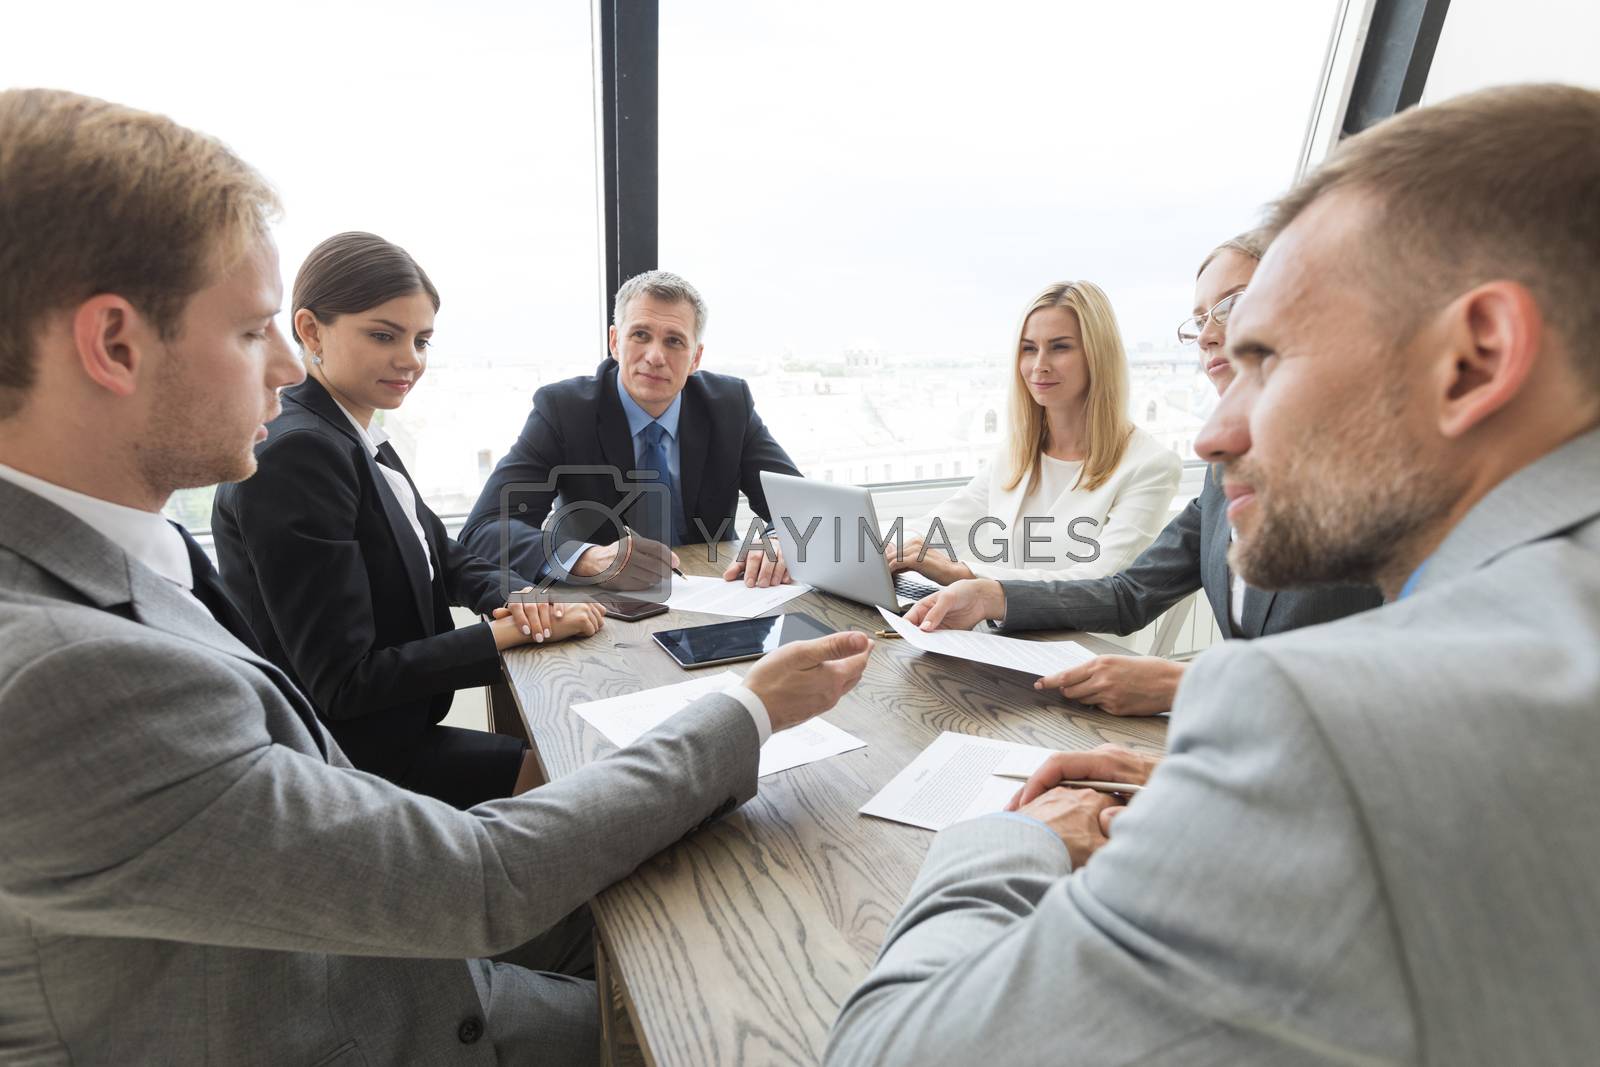 Royalty free image of Business people at meeting by Yellowj